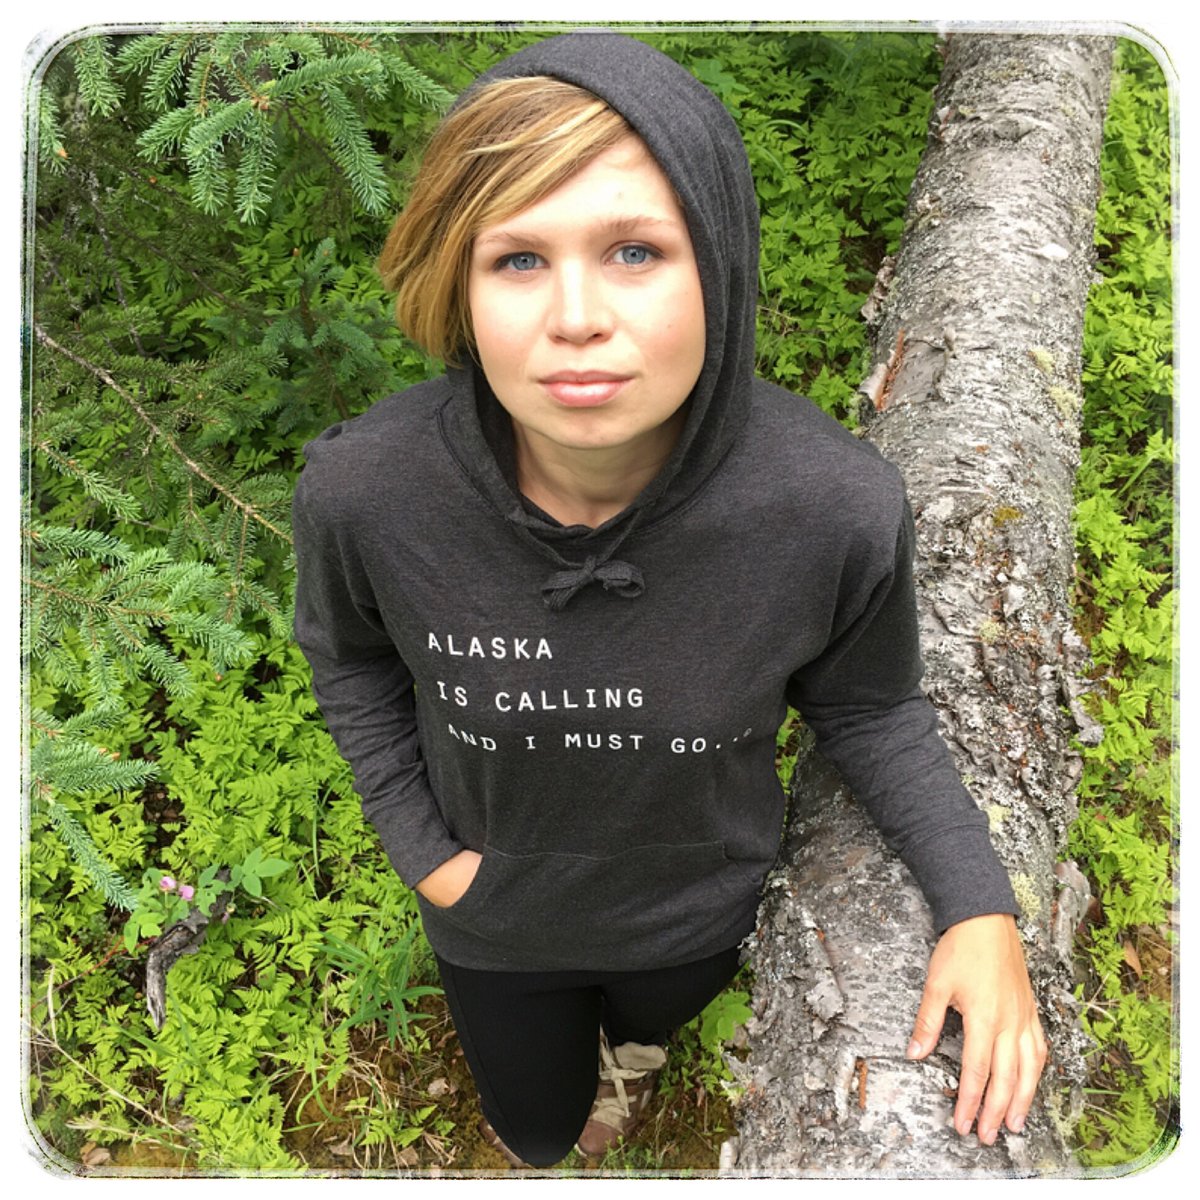 Alaska is Calling and I Must Go Light weight cotton jersey hoodie. 